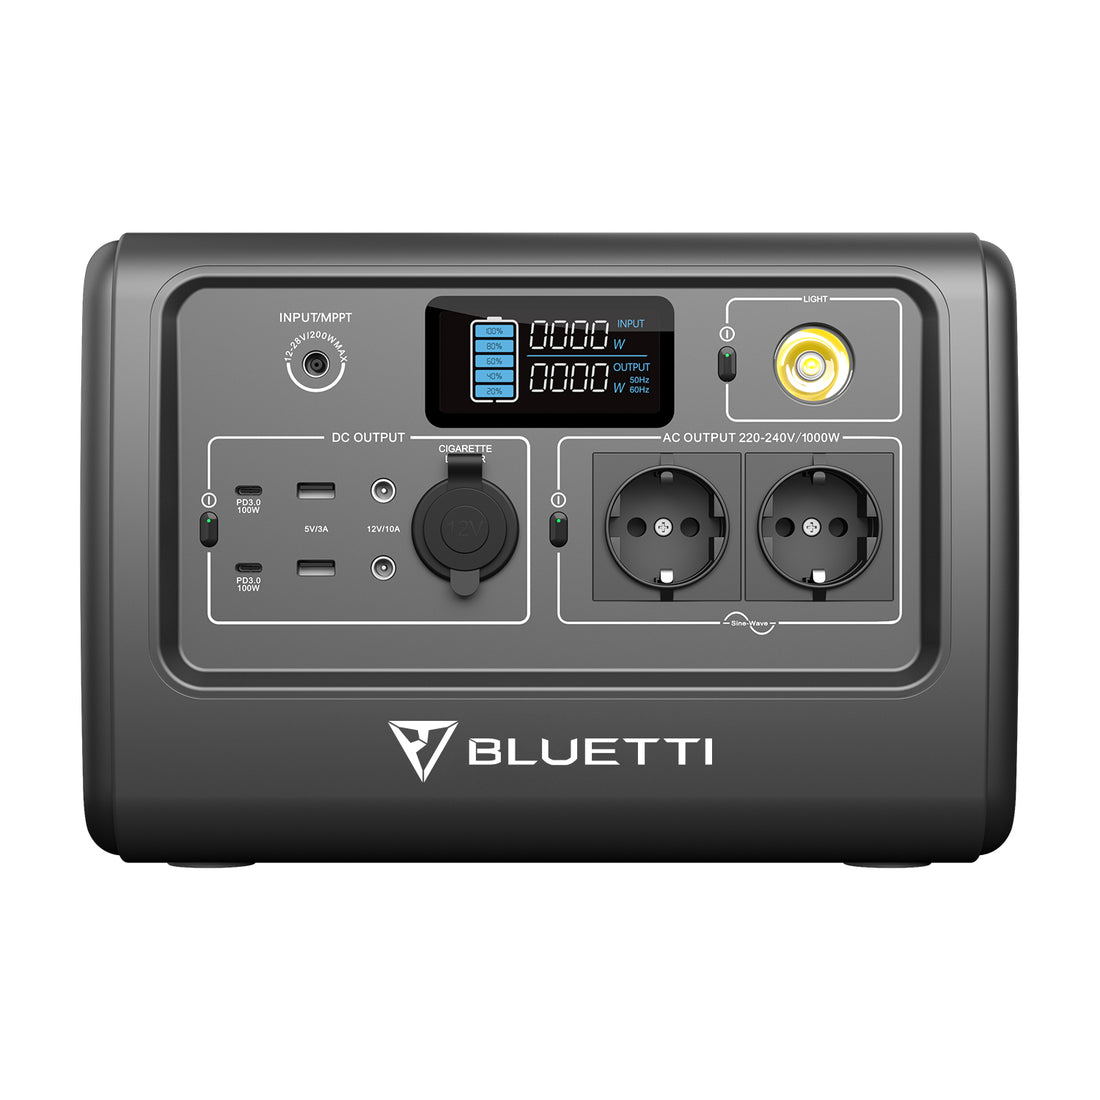 BLUETTI EB70 700w LiFePO4 Solar Generator! 716wh Off Grid Portable Power  Station Review - HOBOTECH - Off Grid Tech DIY And Product Reviews On